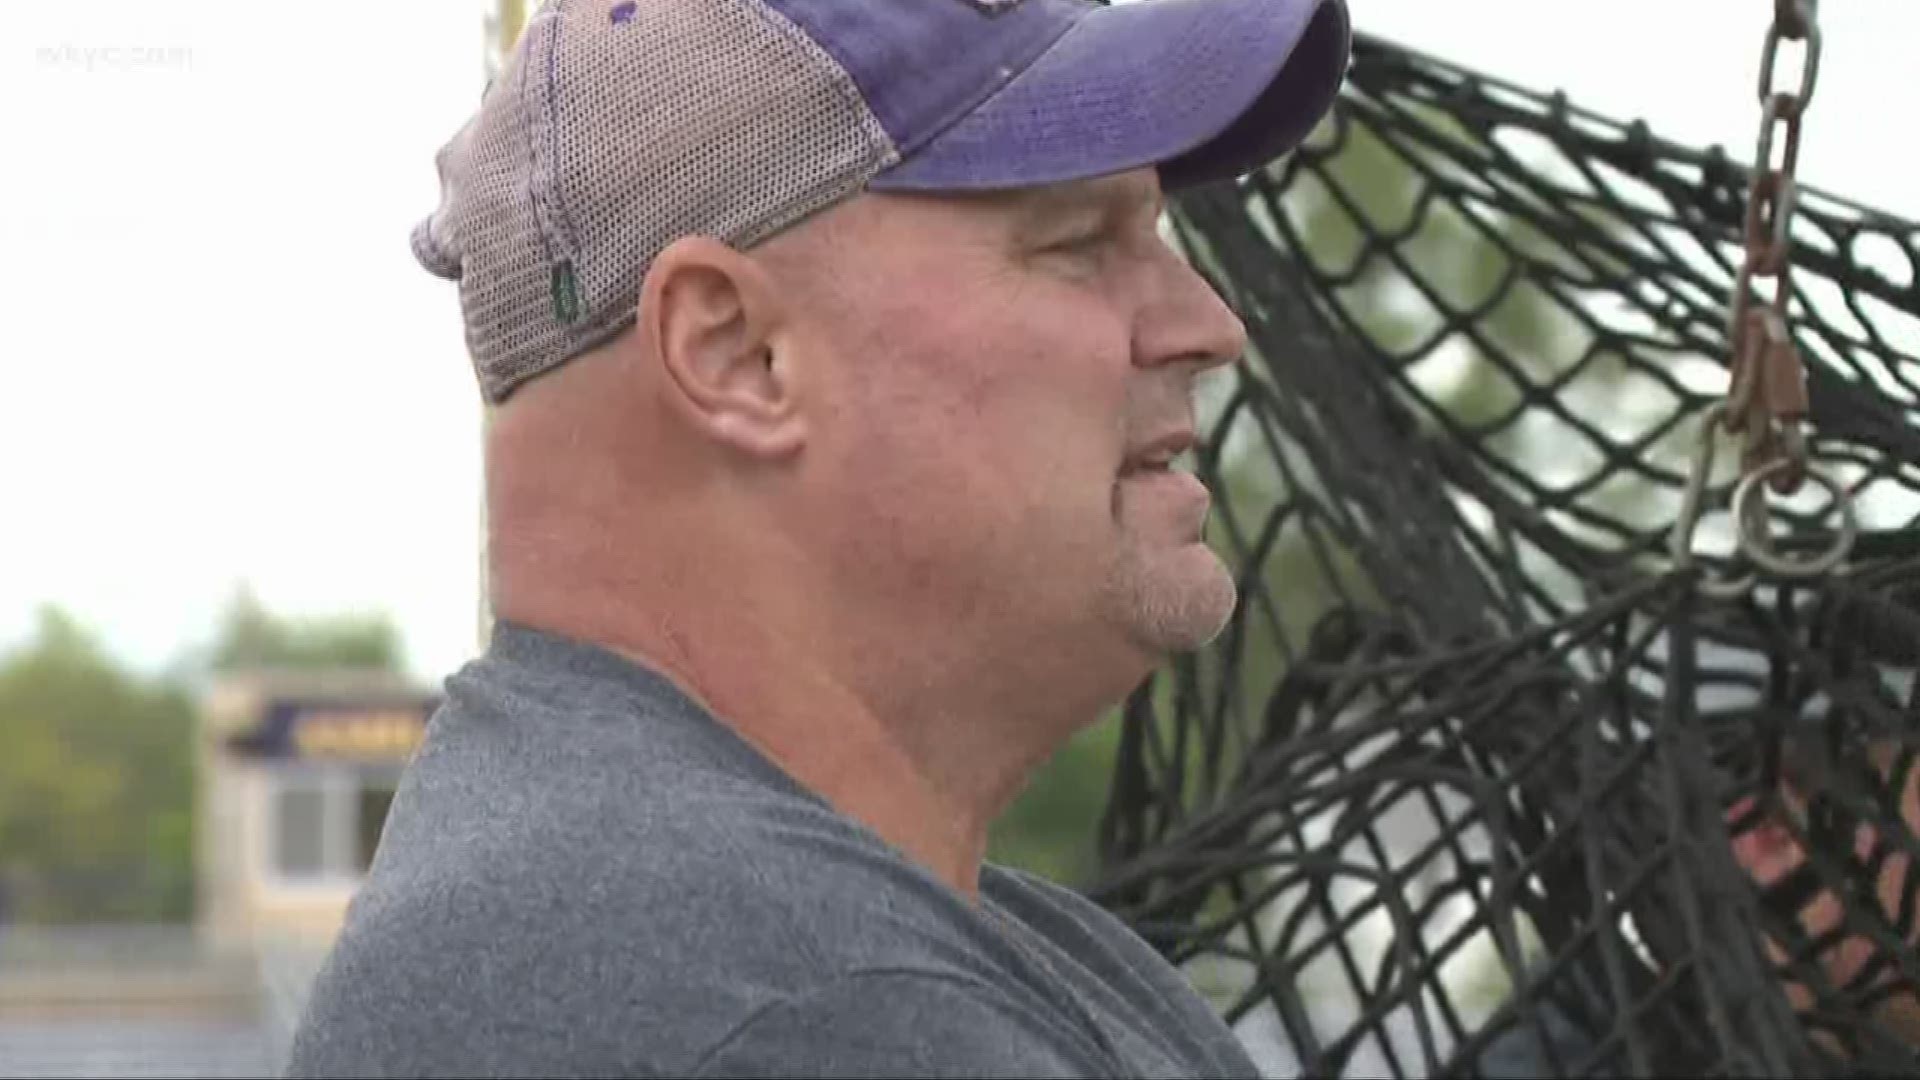 Ashland track and field coach Jud Logan is battling leukemia and inspiring athletes in the process.